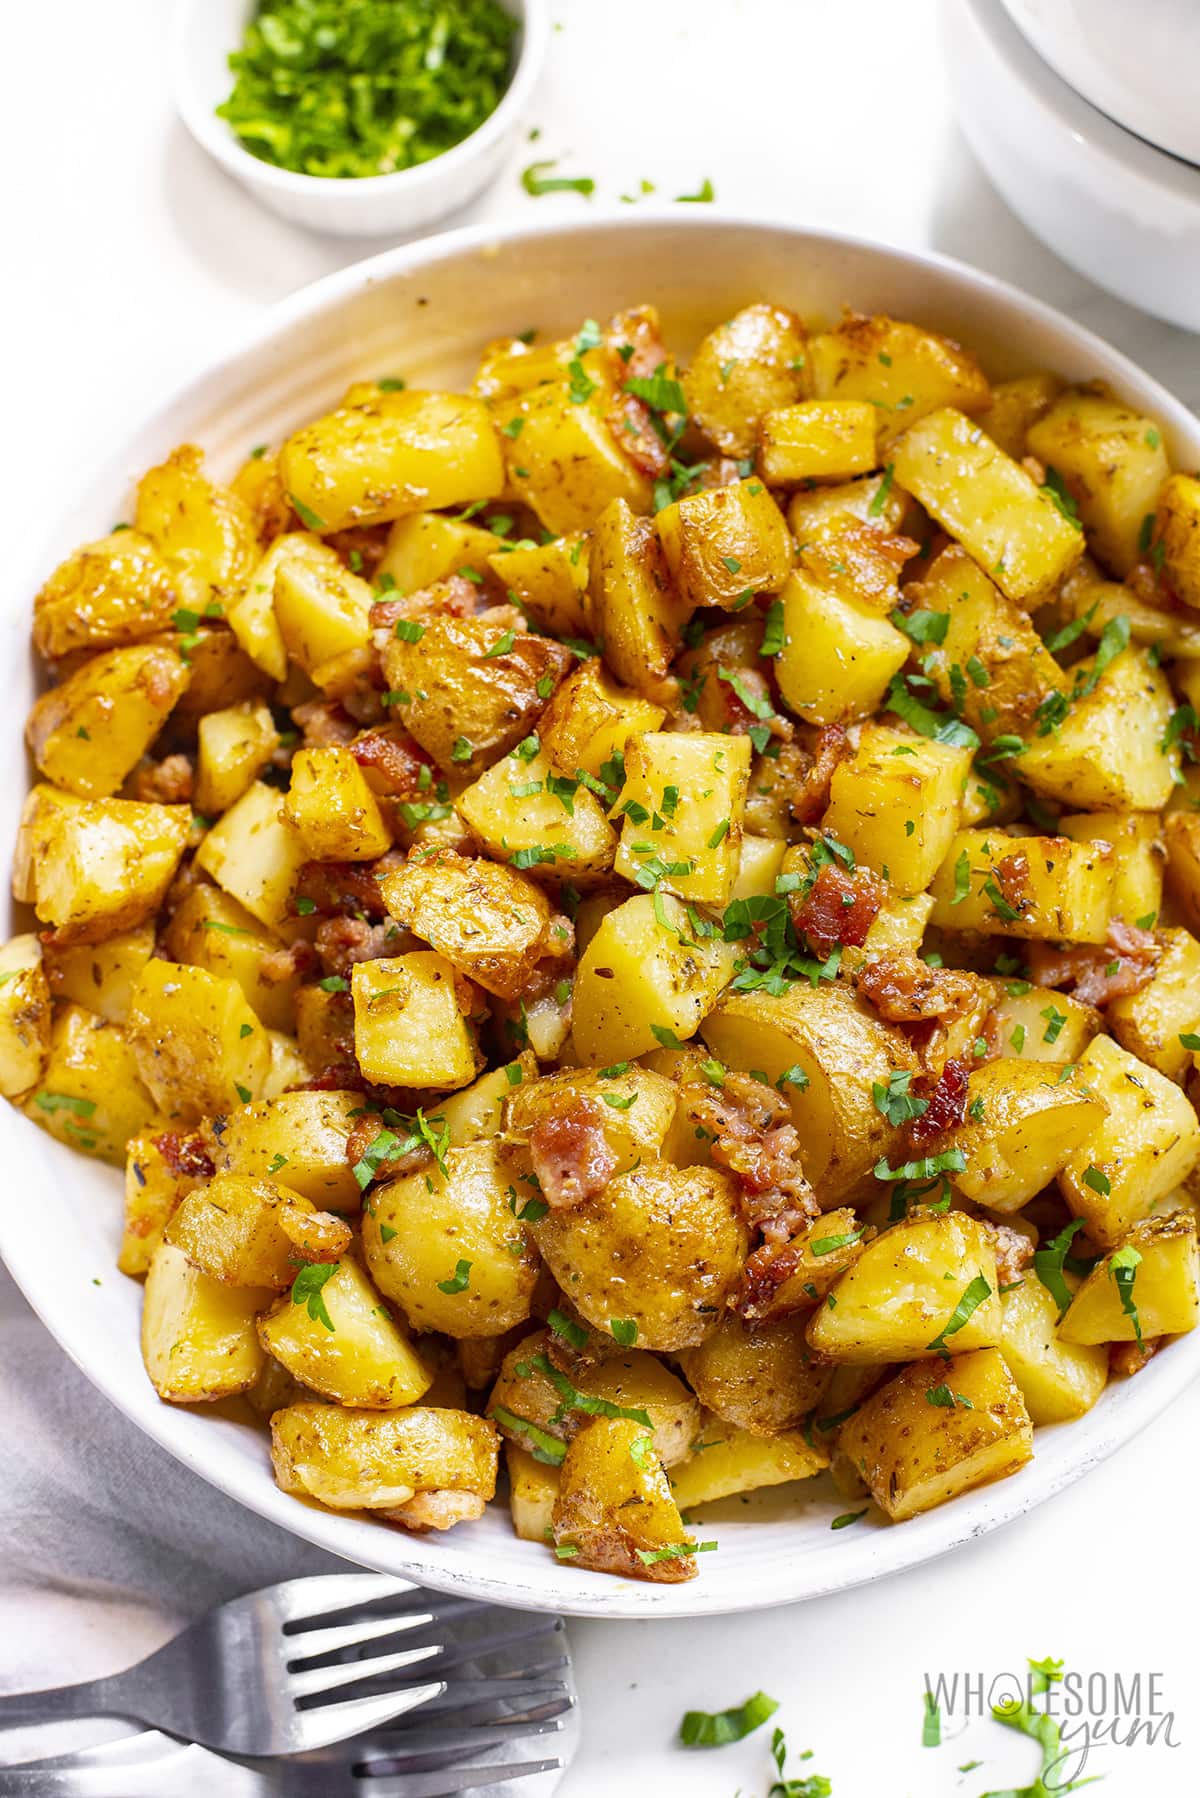 Roasting potatoes using this recipe makes them perfectly crispy and buttery like the ones shown here.